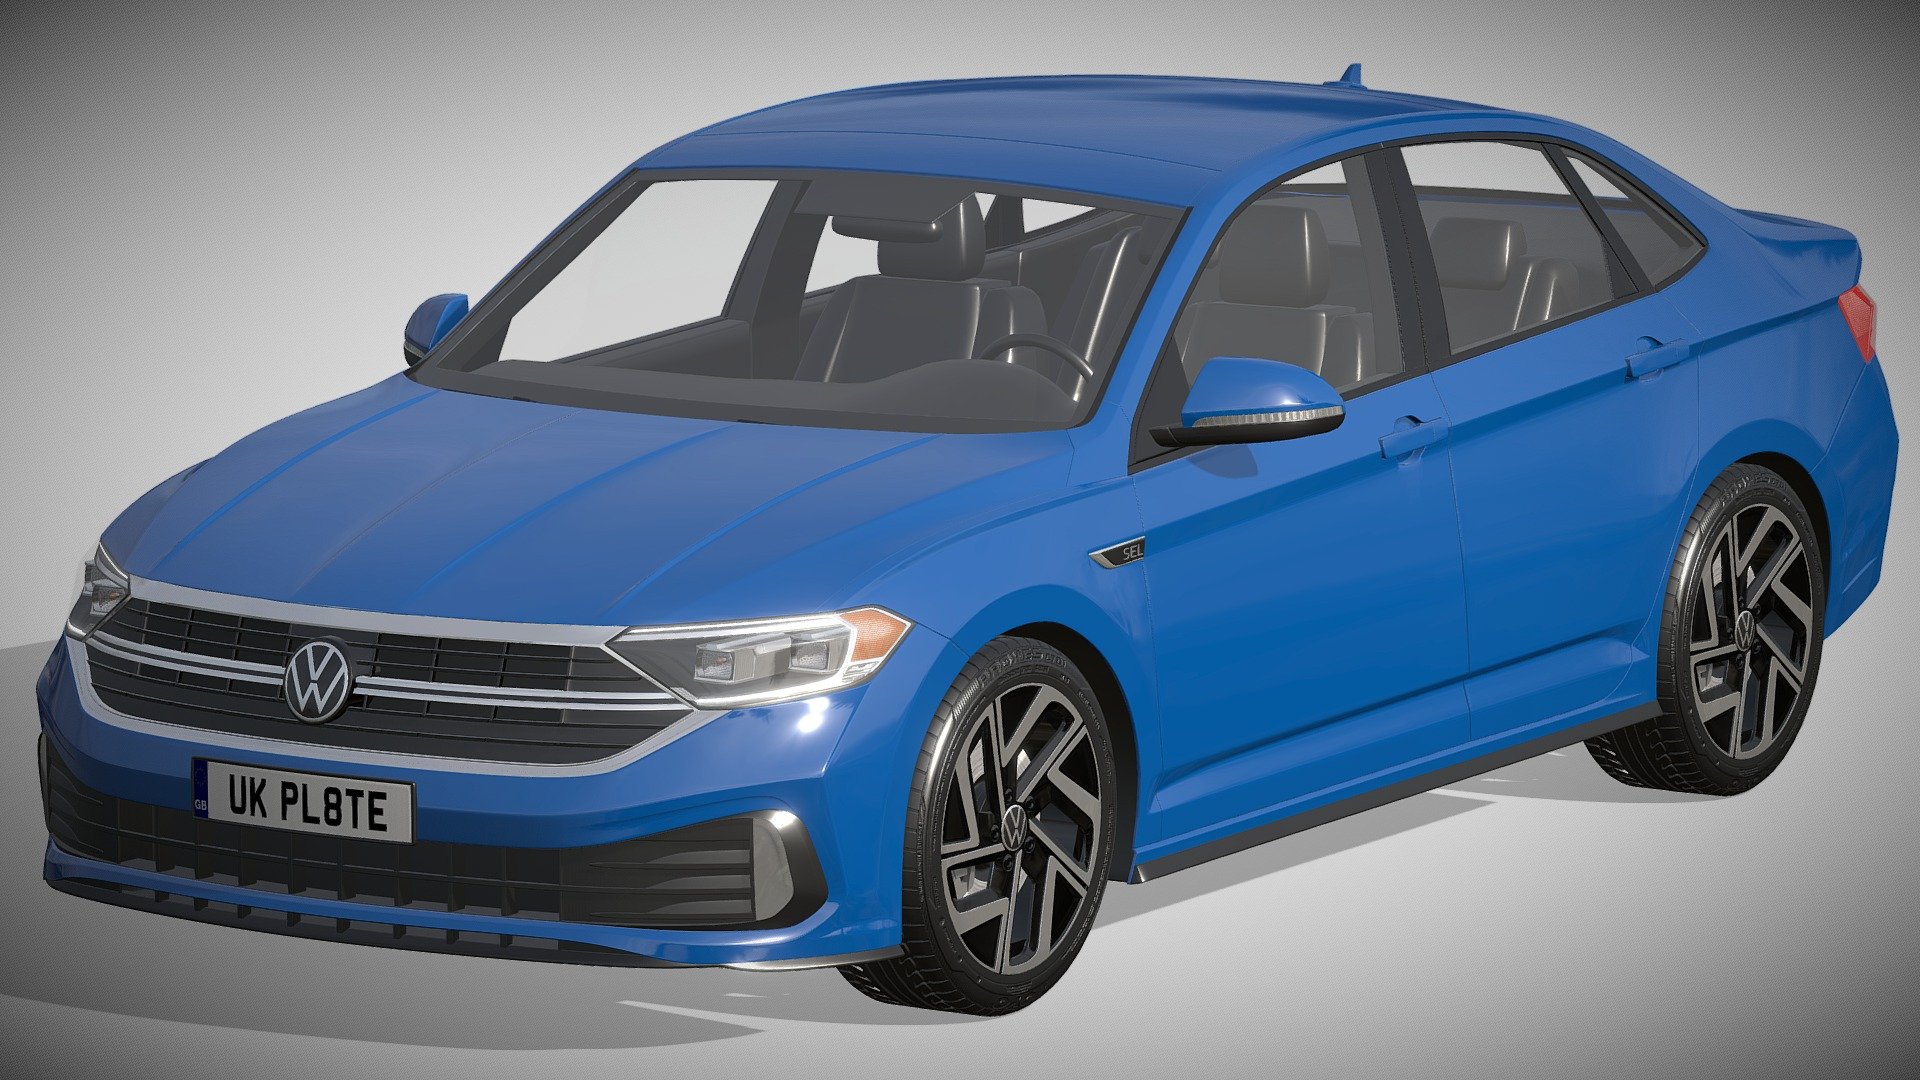 Volkswagen Jetta 2022

https://www.vw.com/en/models/jetta.html

Clean geometry Light weight model, yet completely detailed for HI-Res renders. Use for movies, Advertisements or games

Corona render and materials

All textures include in *.rar files

Lighting setup is not included in the file! - Volkswagen Jetta 2022 - Buy Royalty Free 3D model by zifir3d 3d model